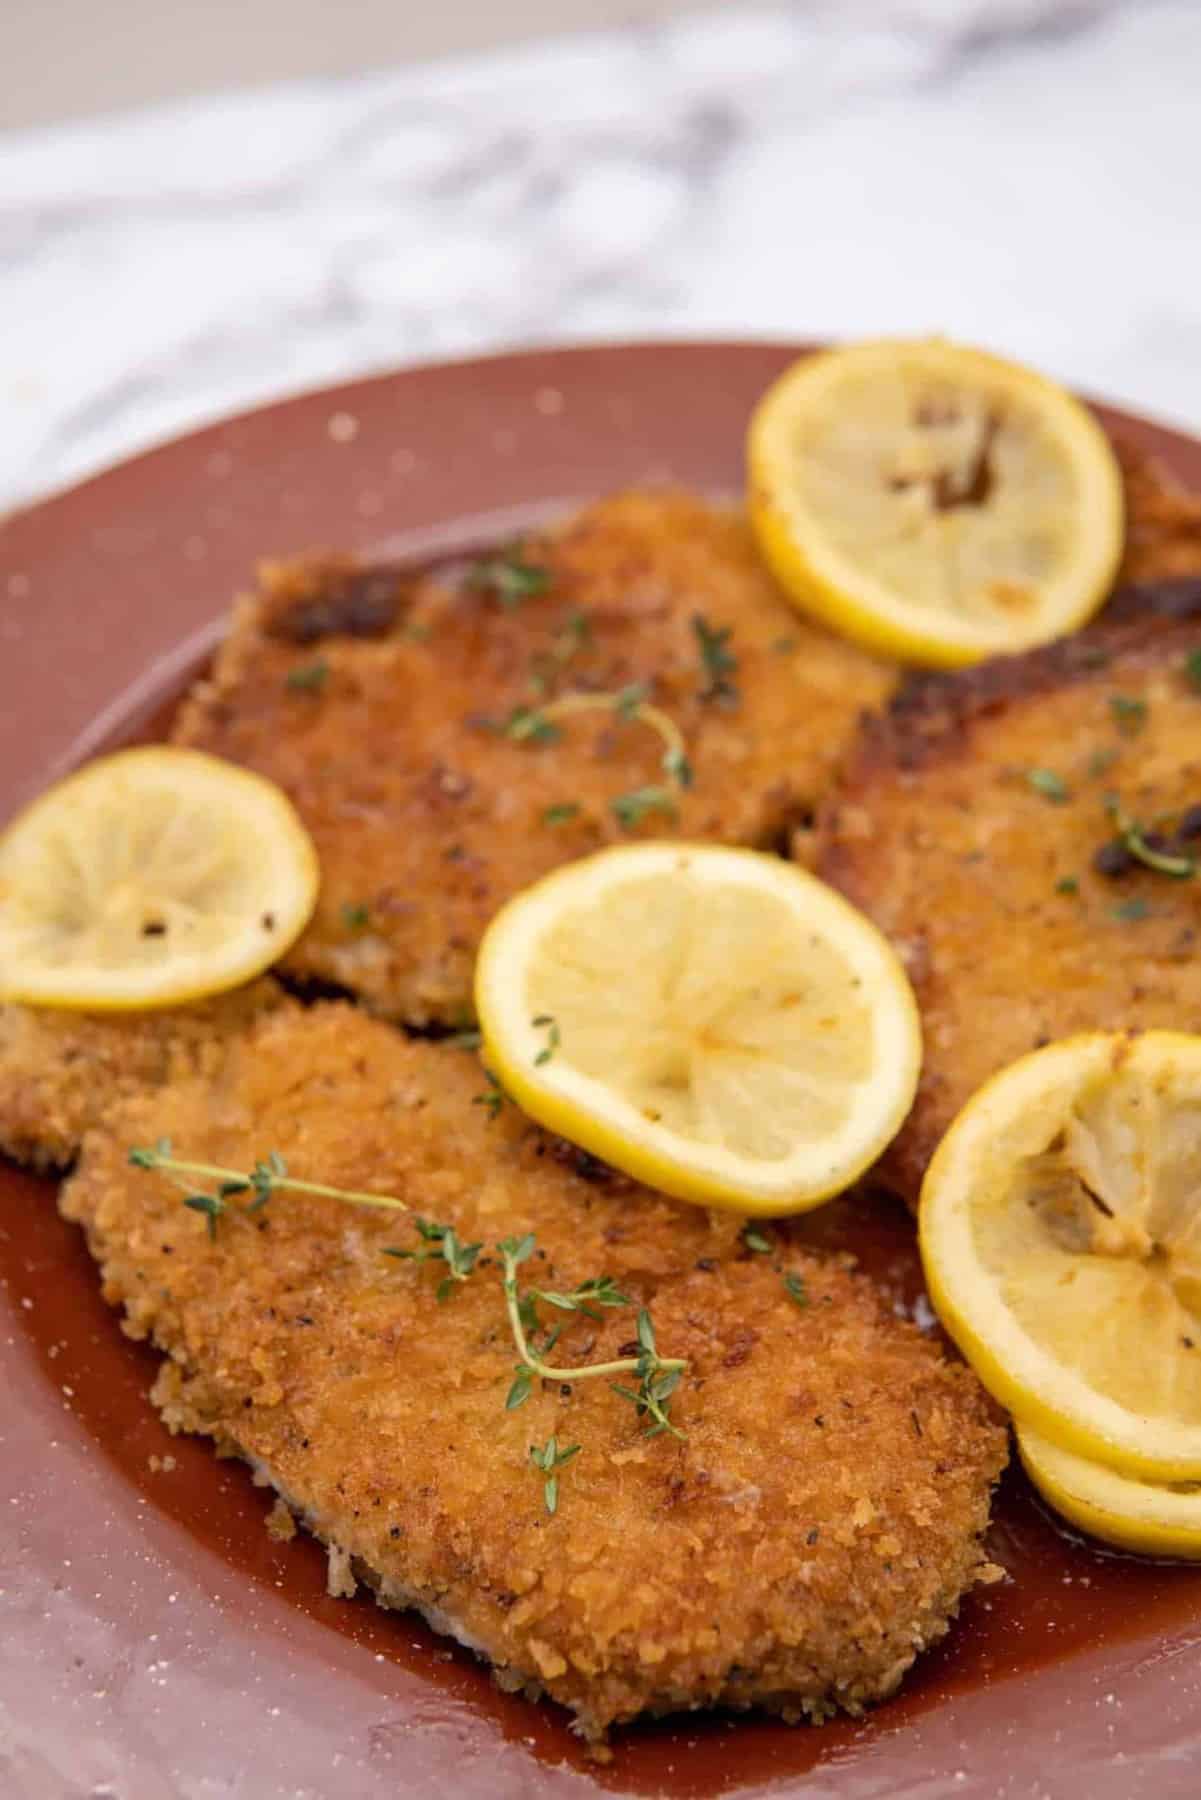 This Pork Schnitzel with Lemon Butter is made with pork chops, panko crumbs, garlic powder, onion powder, paprika, lemon and butter.